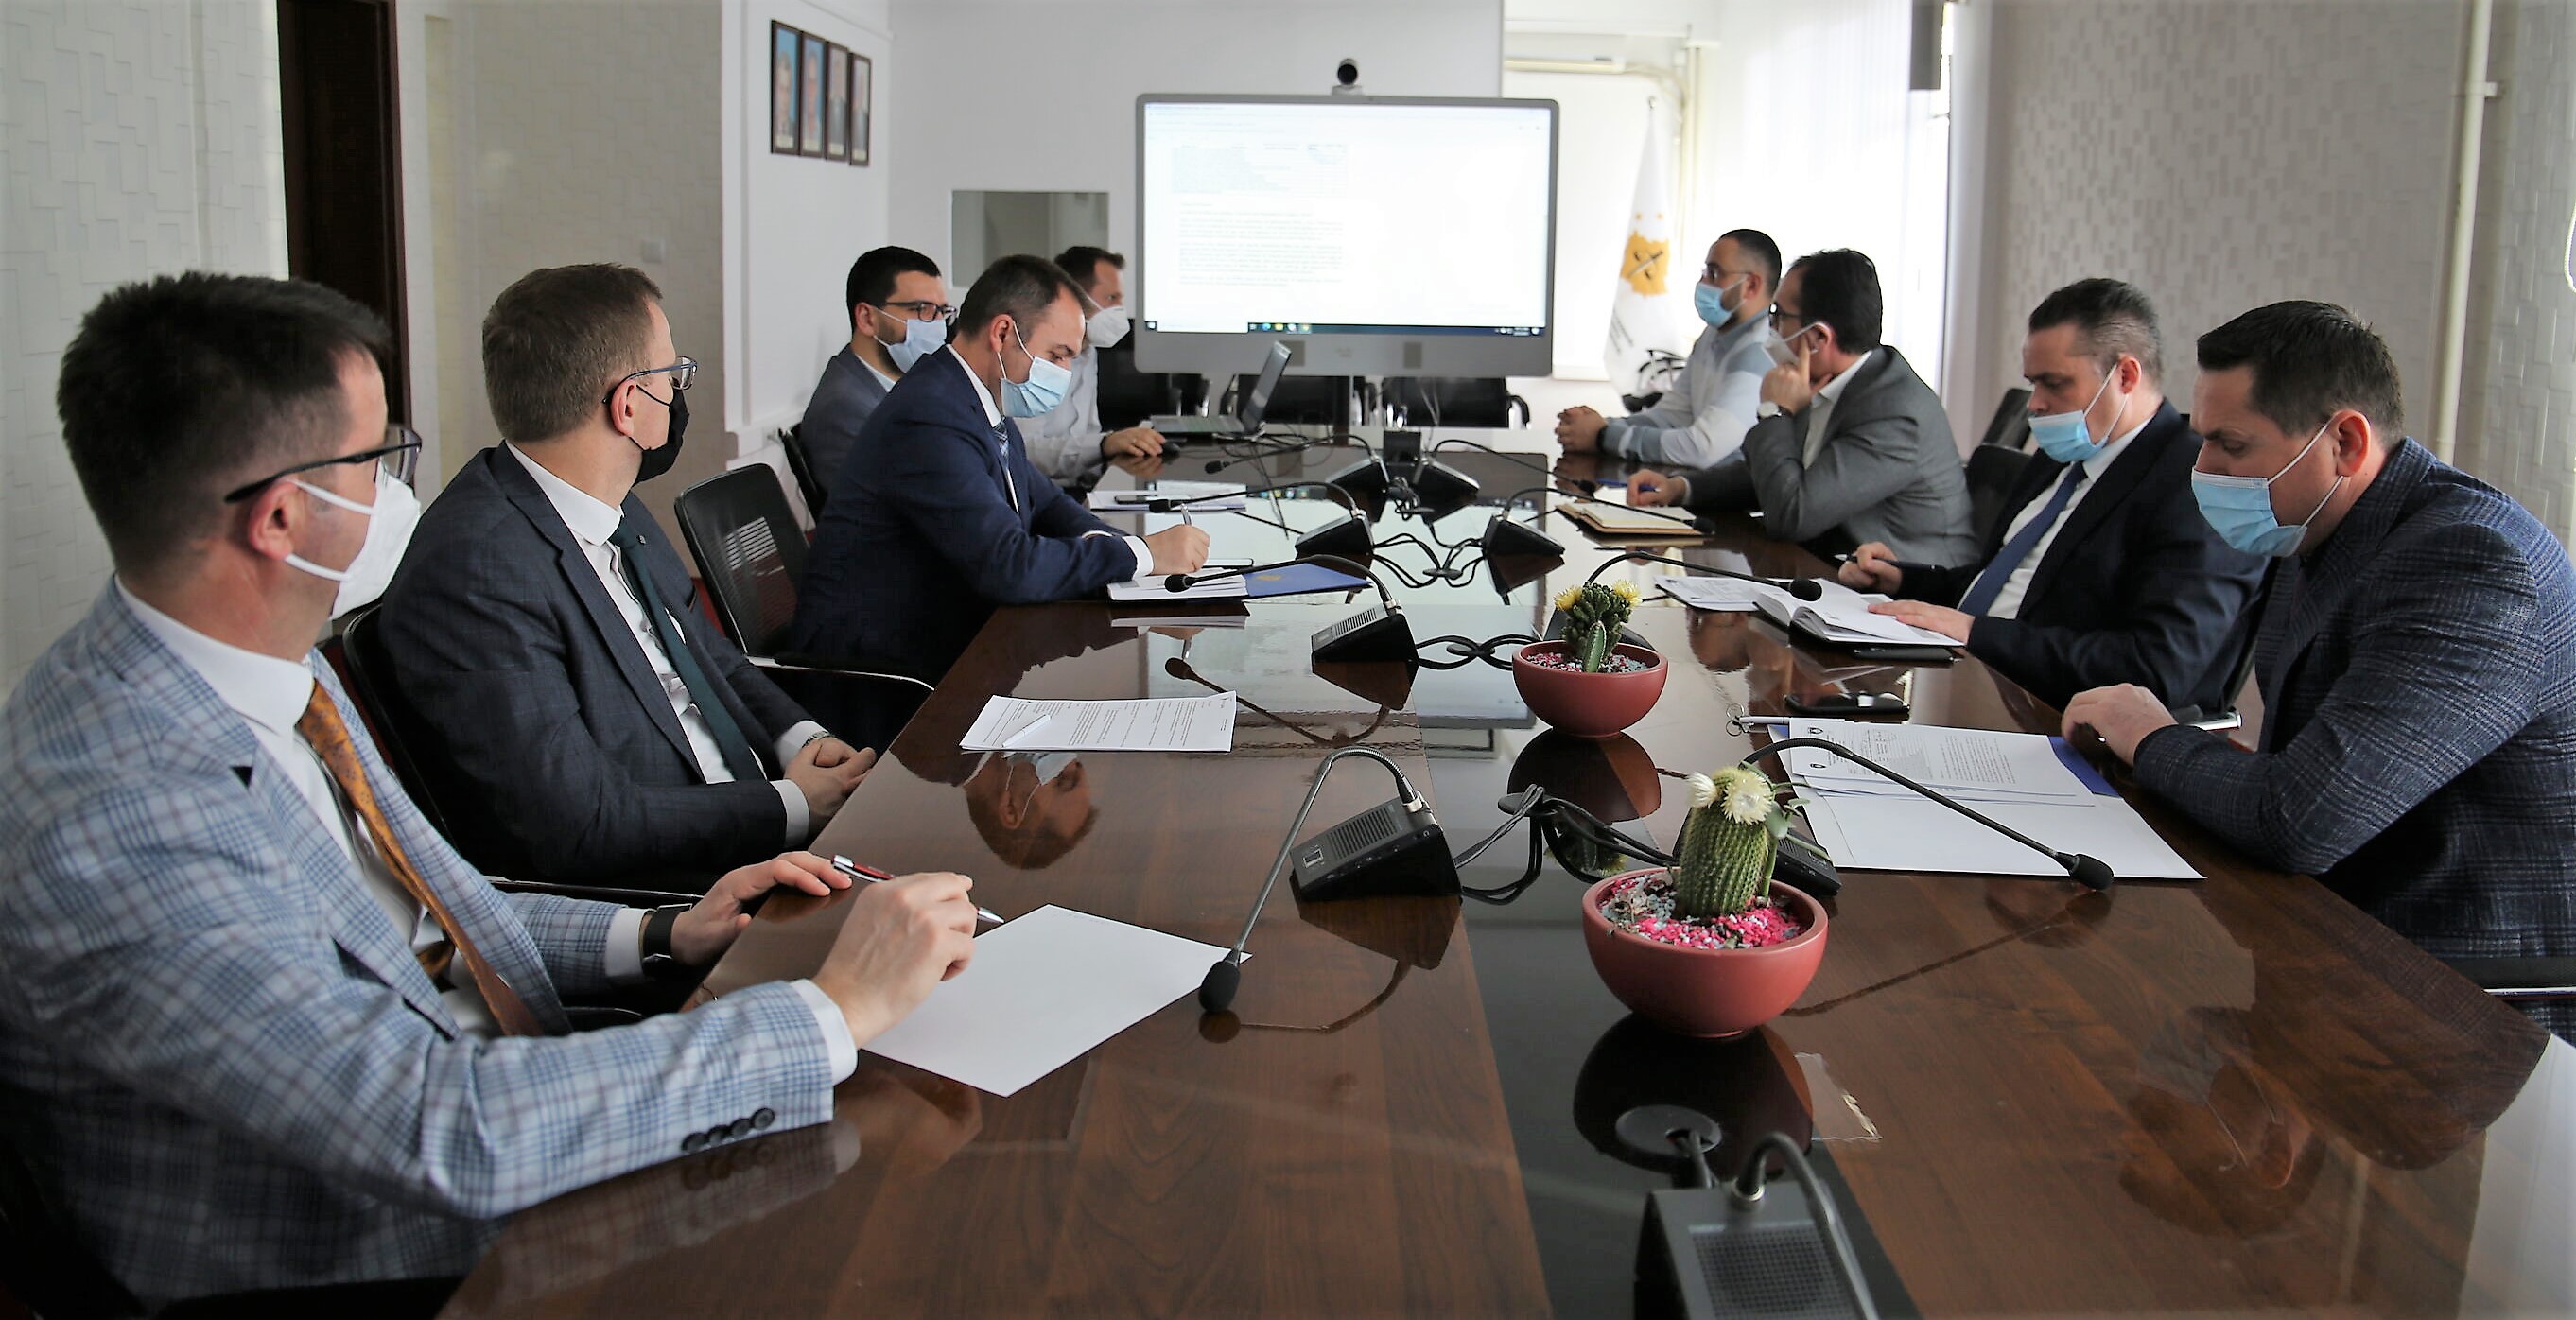 The level of security and exchange of data across prosecutions is discussed